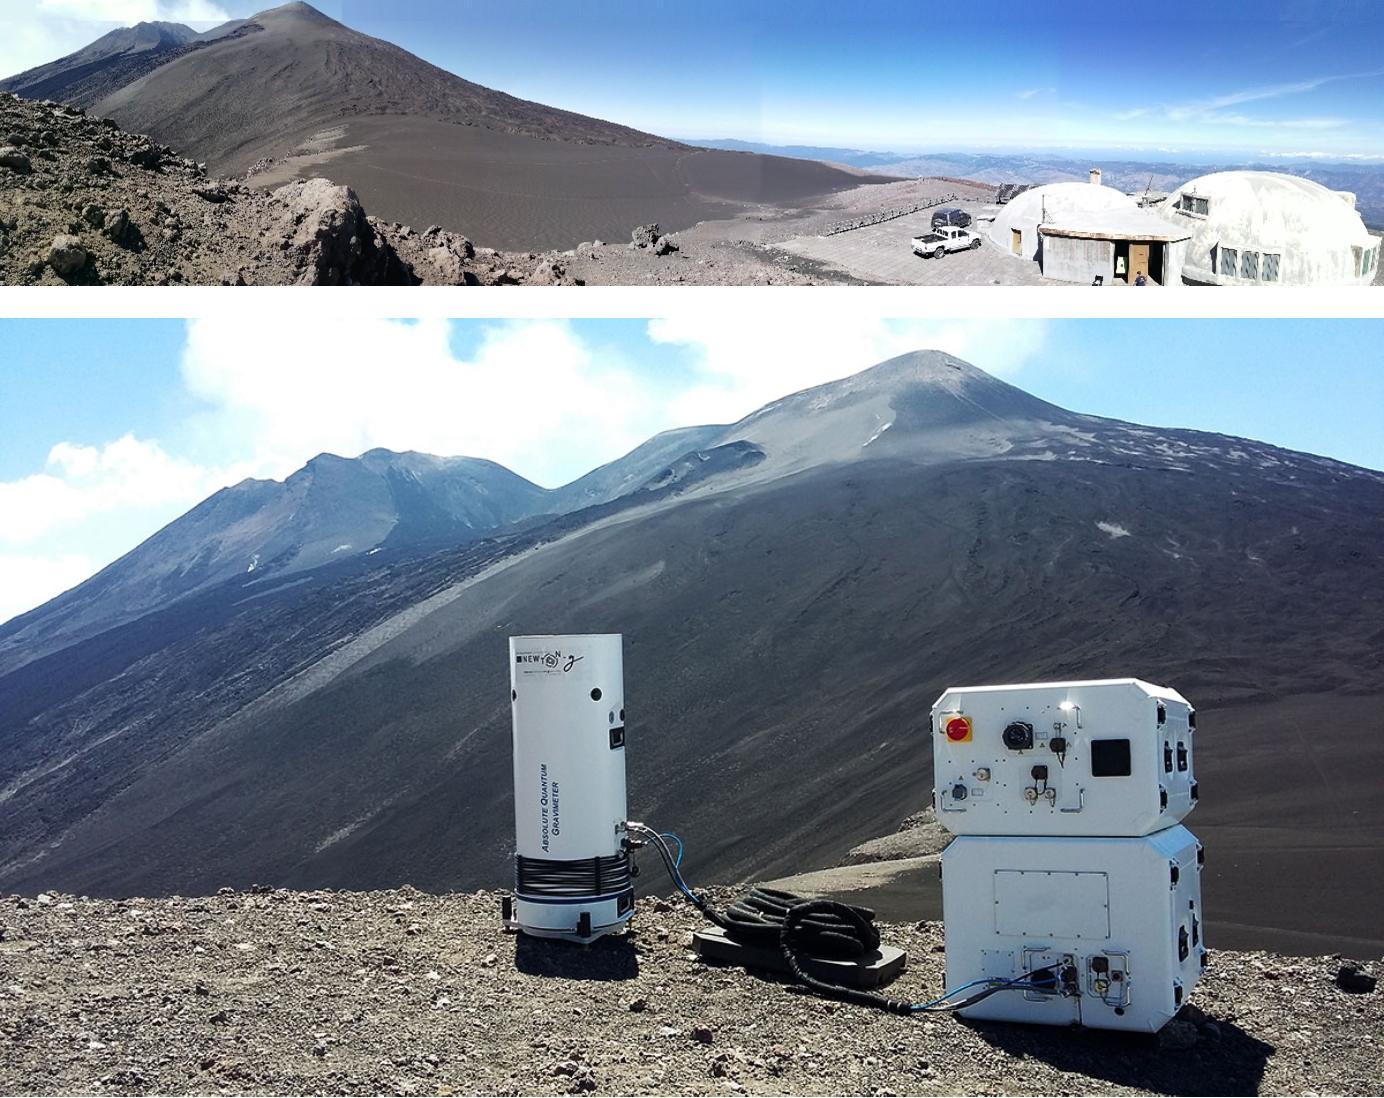 Product: iXblue and the National Institute of Geophysics and Volcanology present the first application of quantum technology to volcano monitoring on Mount Etna - iXblue